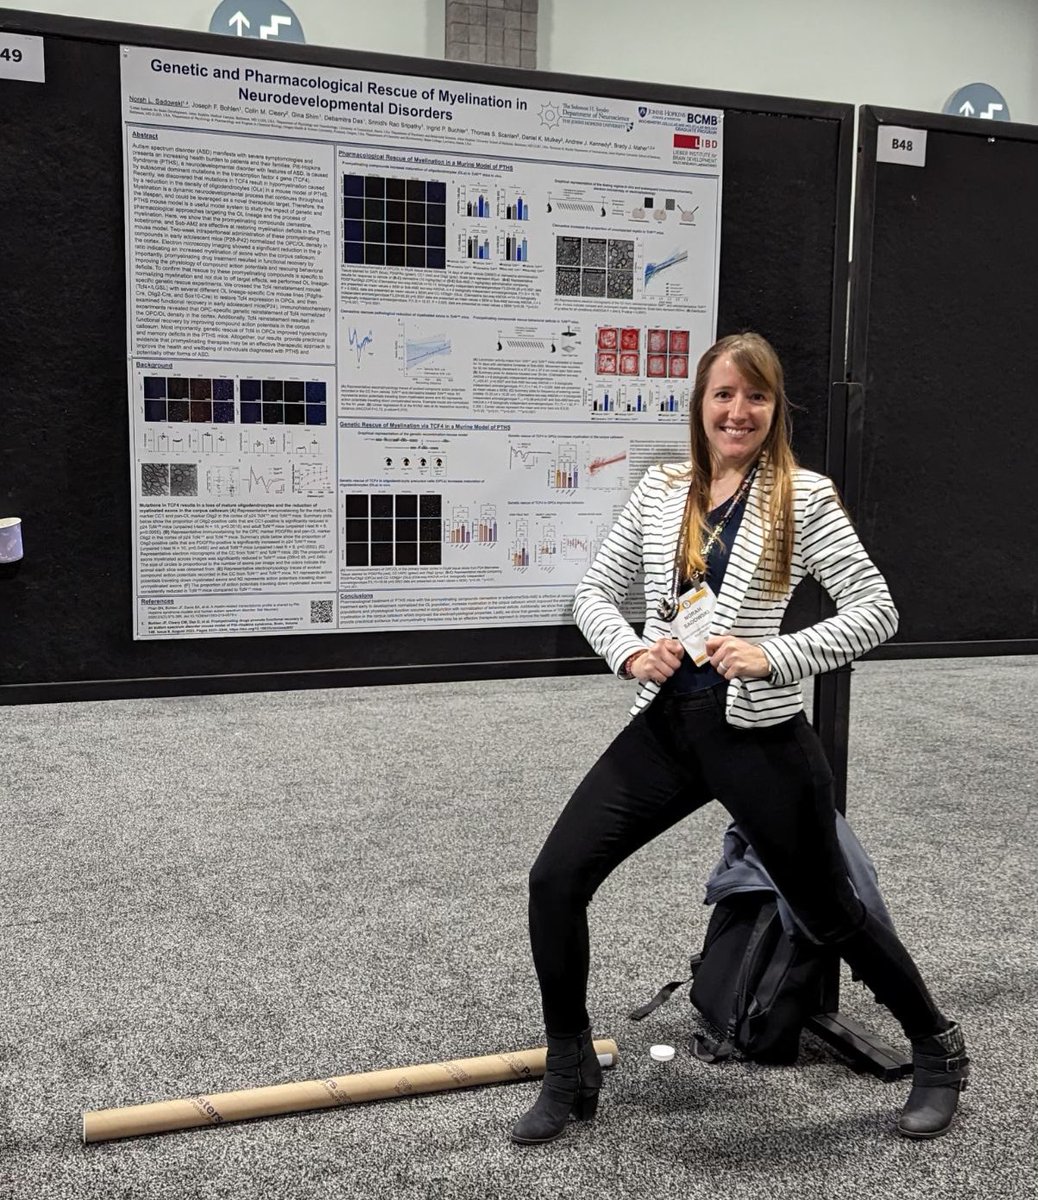 Finishing #SfN23 strong! 💪🏻 Catch @LabMaher’s amazing graduate student @narley_s work on Genetic and Pharmacological Rescue of #myelination in Neurodevelopmental Disorders. Stop by PSTR450.22 (B49) today from 8am - 12pm to learn more! @LieberInstitute @SfNtweets #womeninSTEM